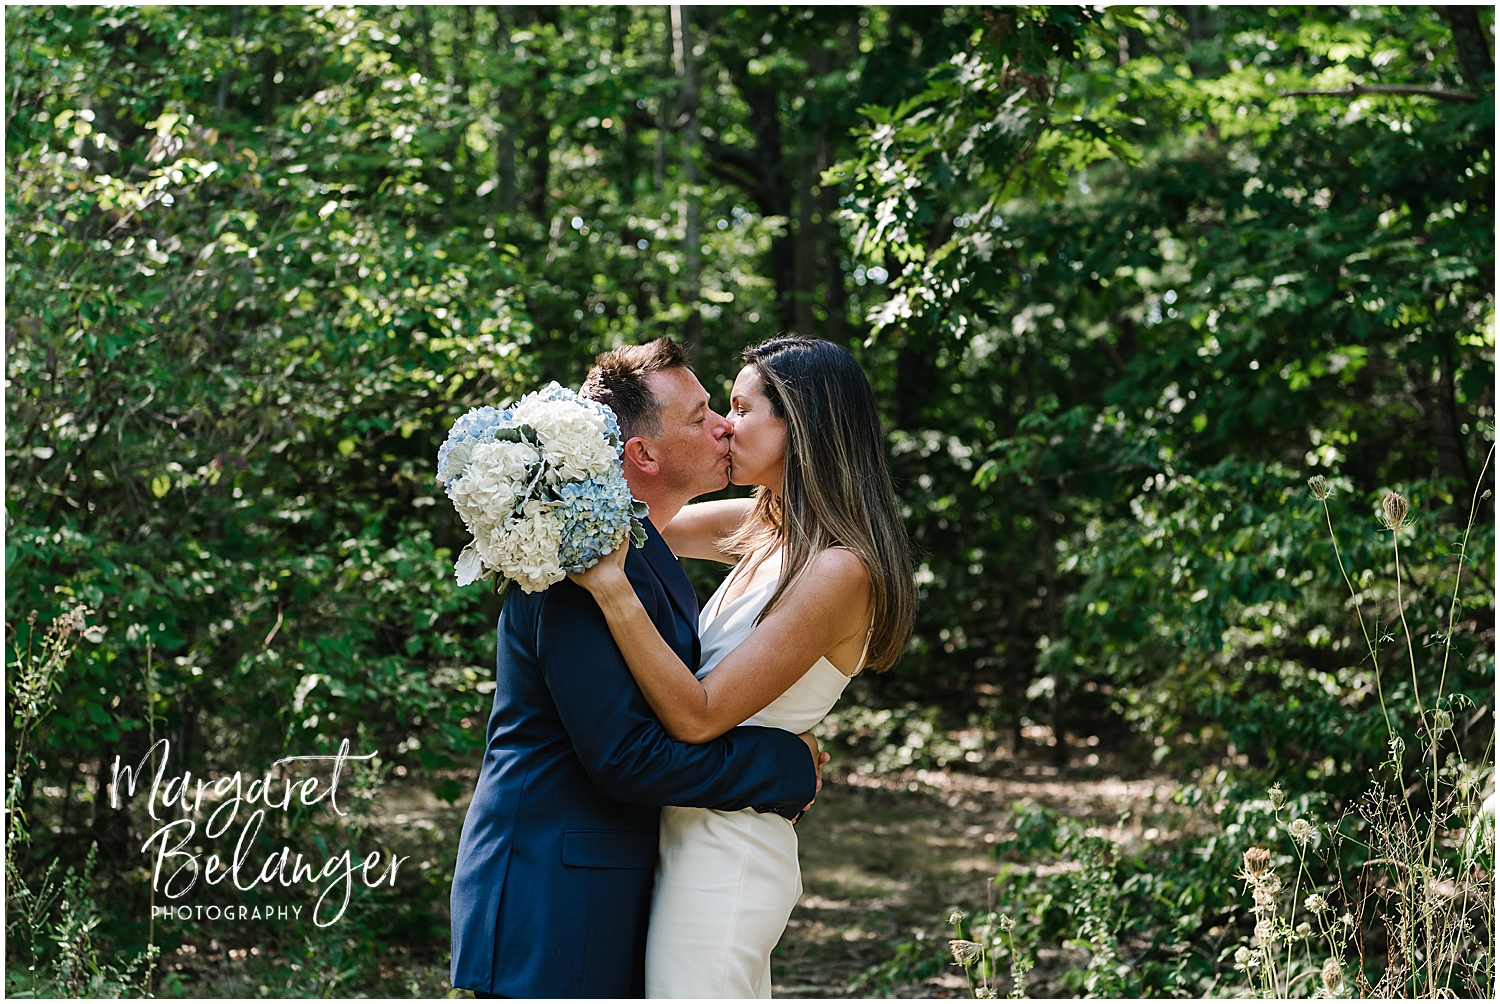 A couple kissing amidst greenery with the woman holding a bouquet of hydrangeas.